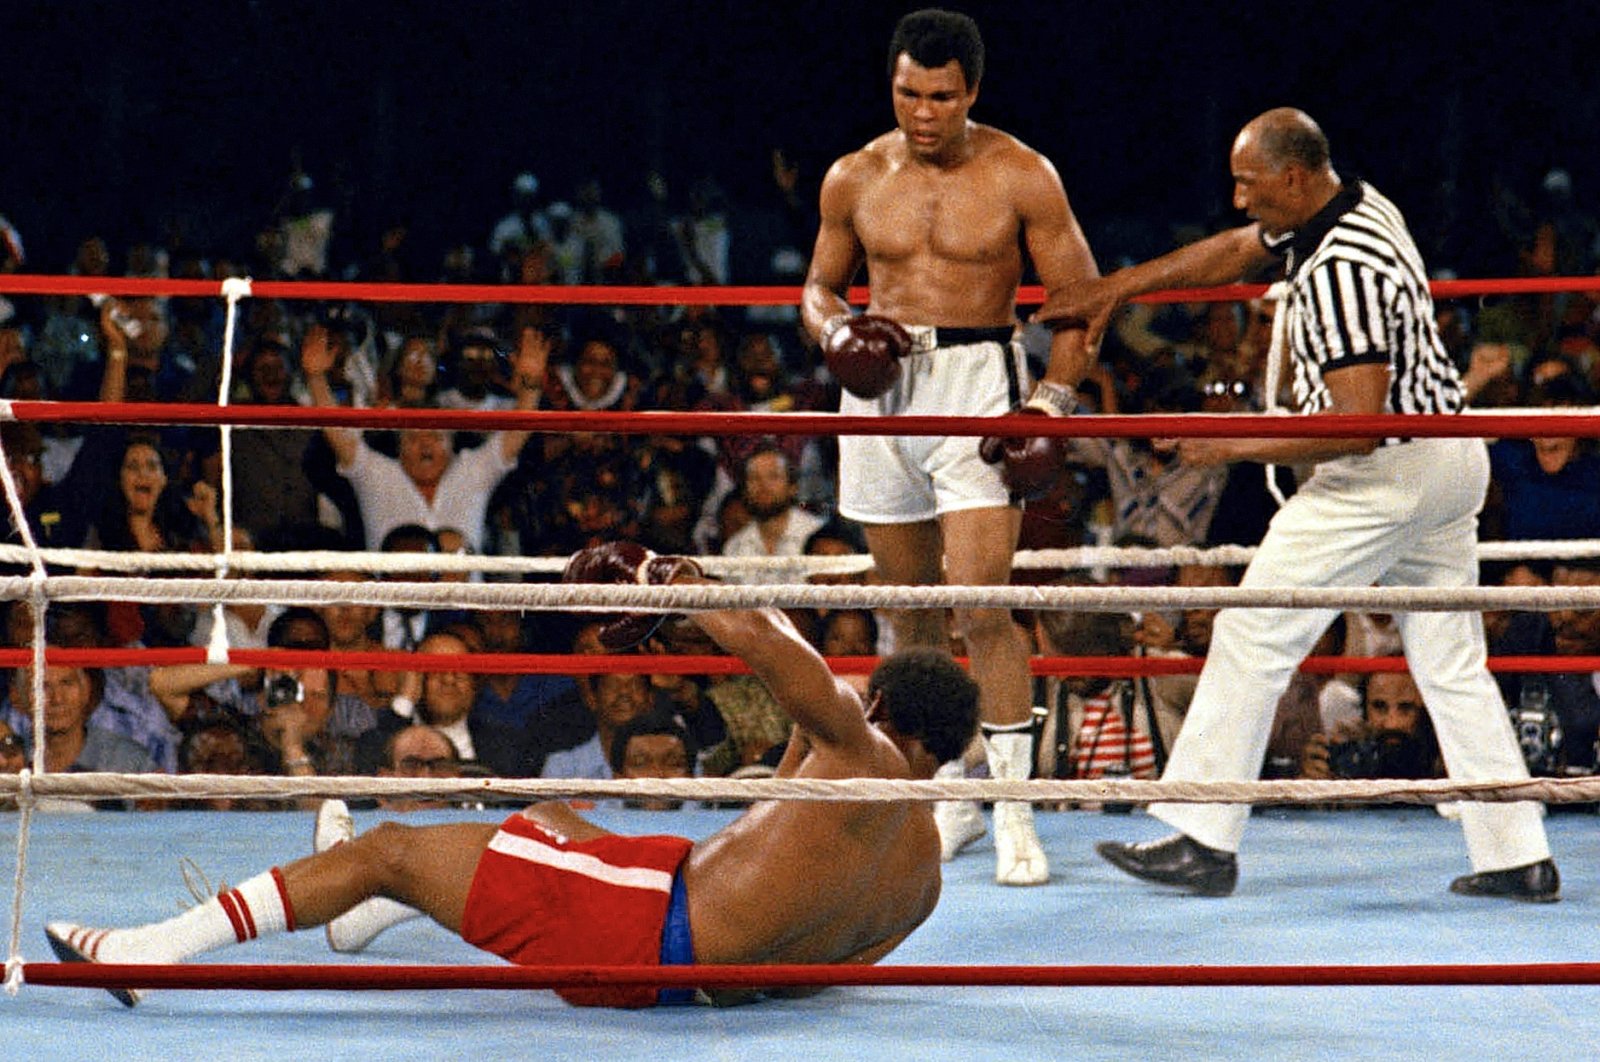 Muhammad Ali (C) in action against defending heavyweight champion George Foreman in the eighth round of their championship bout, Kinshasa, Zaire, Oct. 30, 1974. (AP Photo)